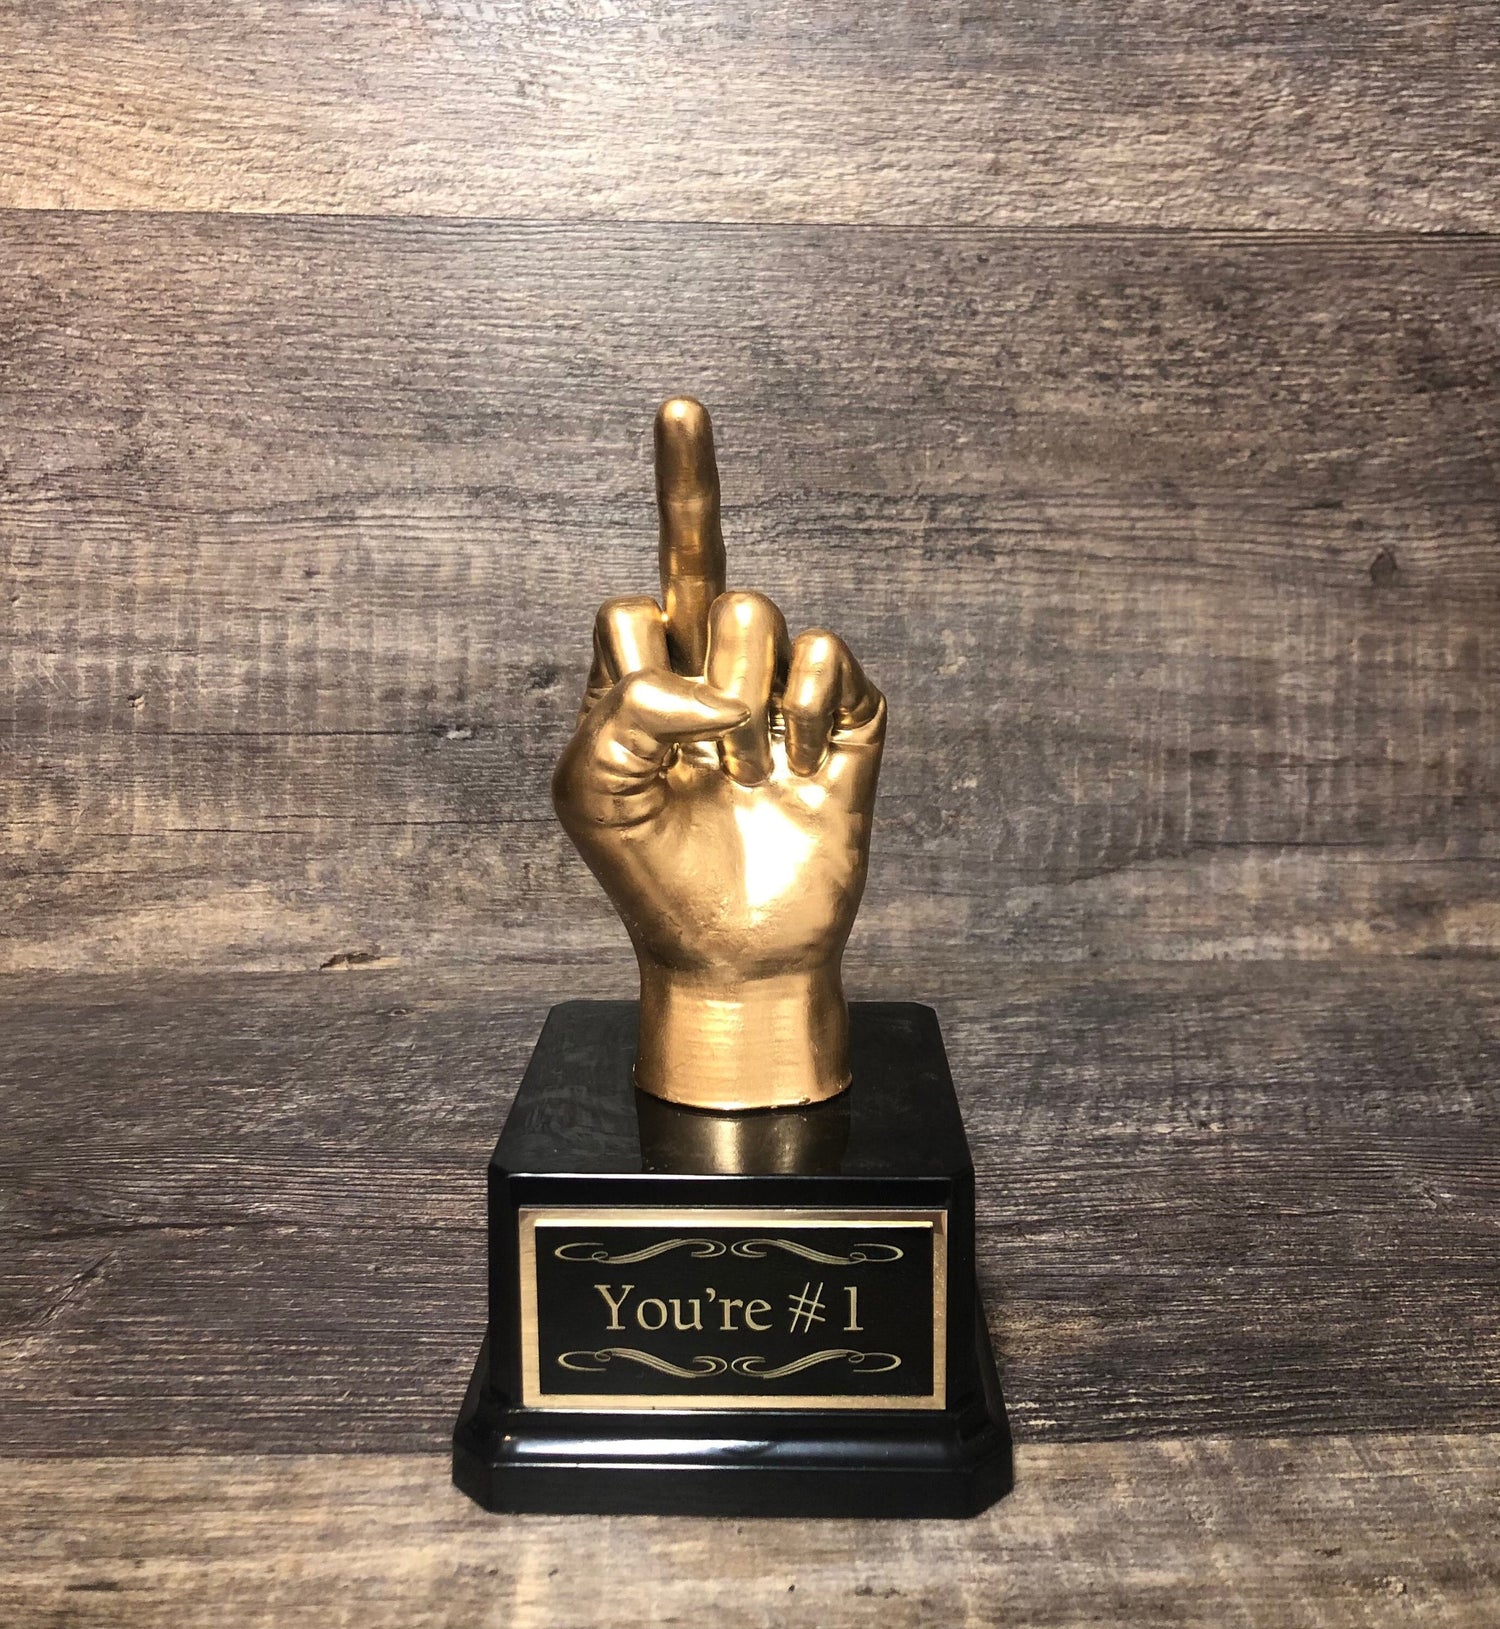 Funny Trophy You're #1 Middle Finger Gag Gift Adult Humor Friend Birthday Gift Flipping You The Bird F*ck You Trophy One Finger Two Words